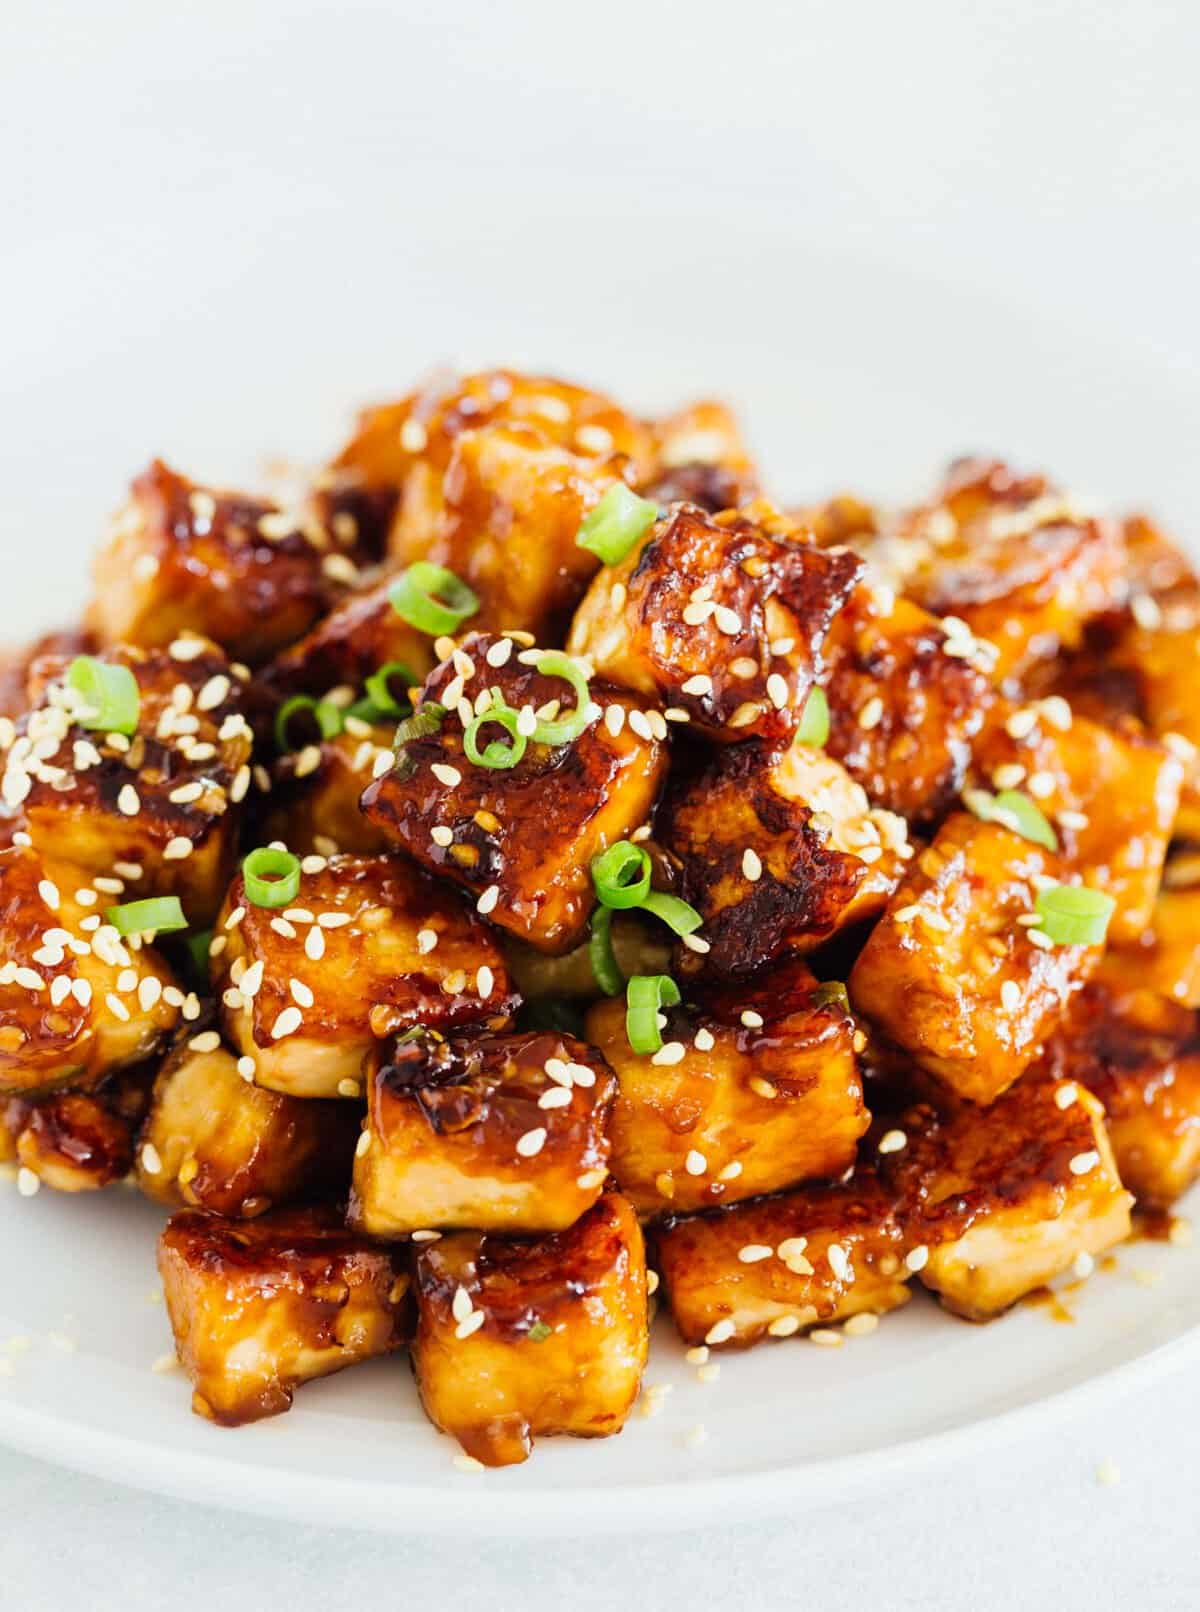 If you aren't totally 100% on board with tofu yet, this pan-fried sesame garlic tofu will have you head over heels in love with it! #tofu #tofurecipe #vegan #veganrecipes